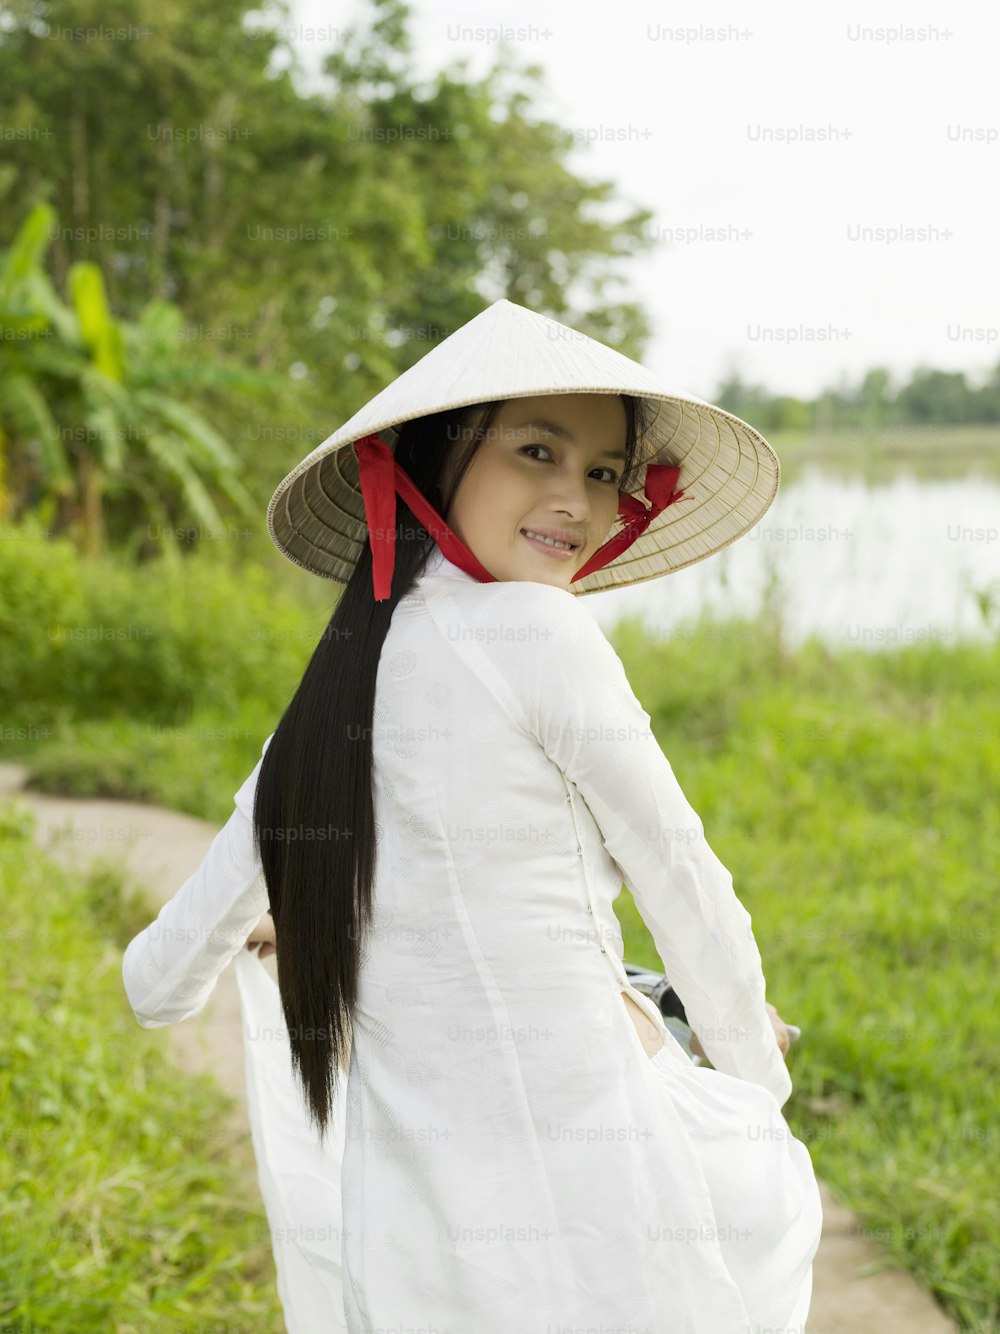 Beautiful Vietnamese Girl Wearing Black Luxury Color Ao Dai Stading At  Pagoda High-Res Stock Photo - Getty Images